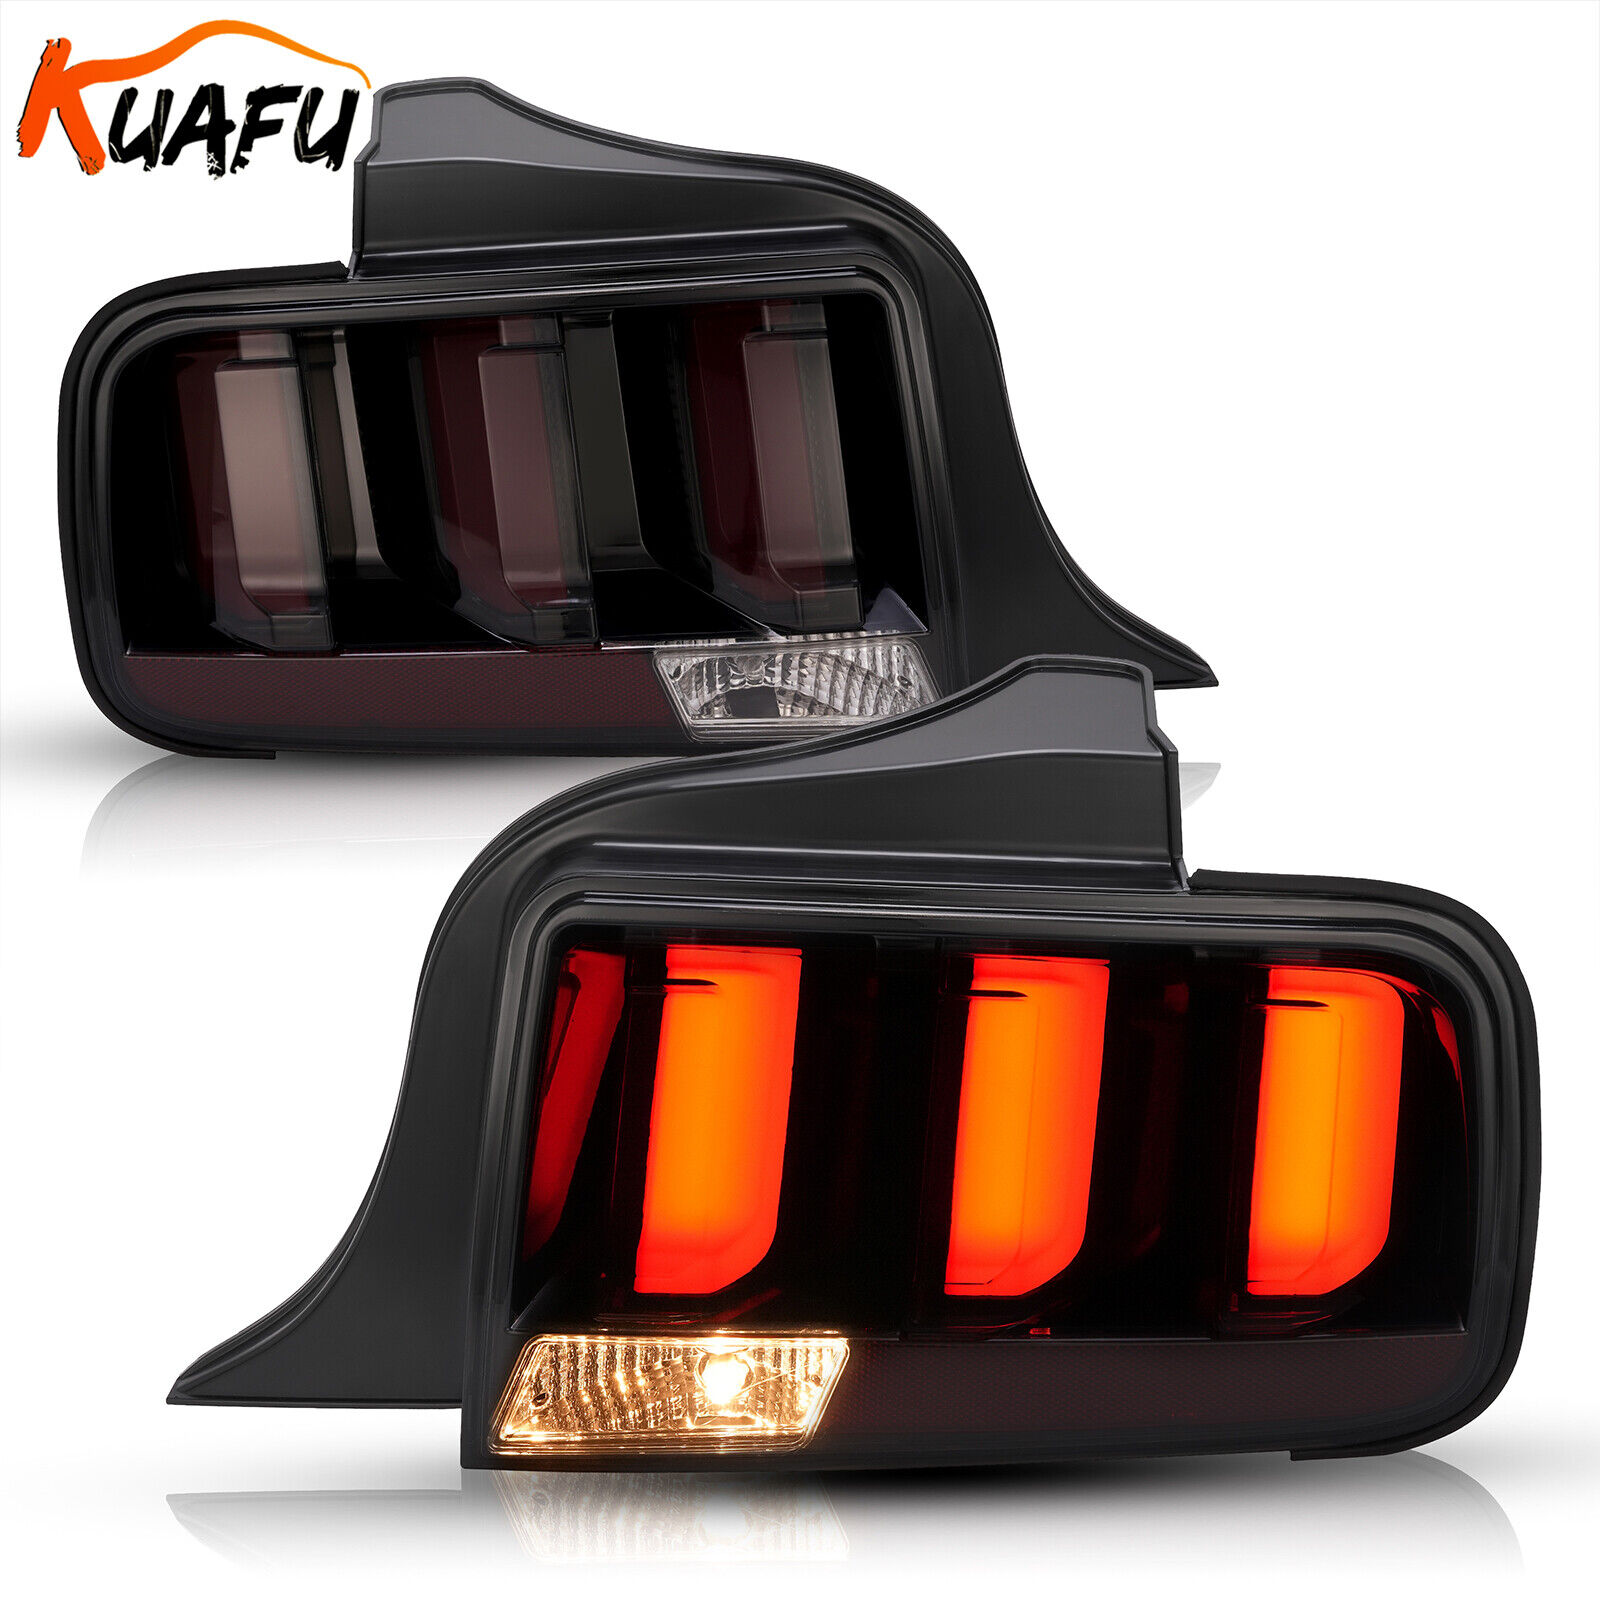 KUAFU Smoked Lens LED Tube Turn Tail Lights For Ford Mustang 05-09 #FO2800191